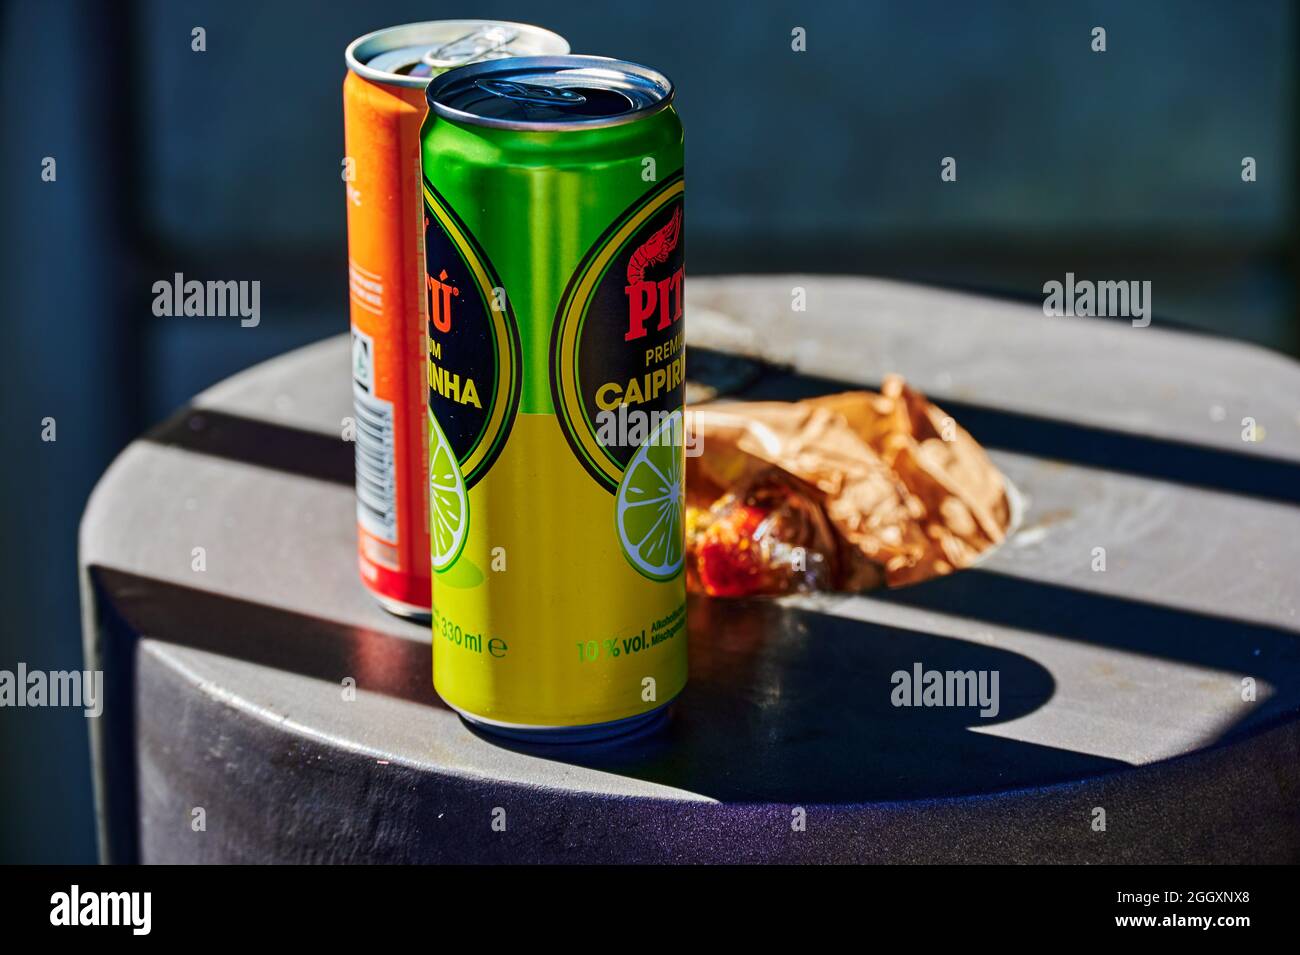 Schoenefeld, Germany - September 3, 2021: Two empty beverage cans that have been placed on a full trash can. Stock Photo